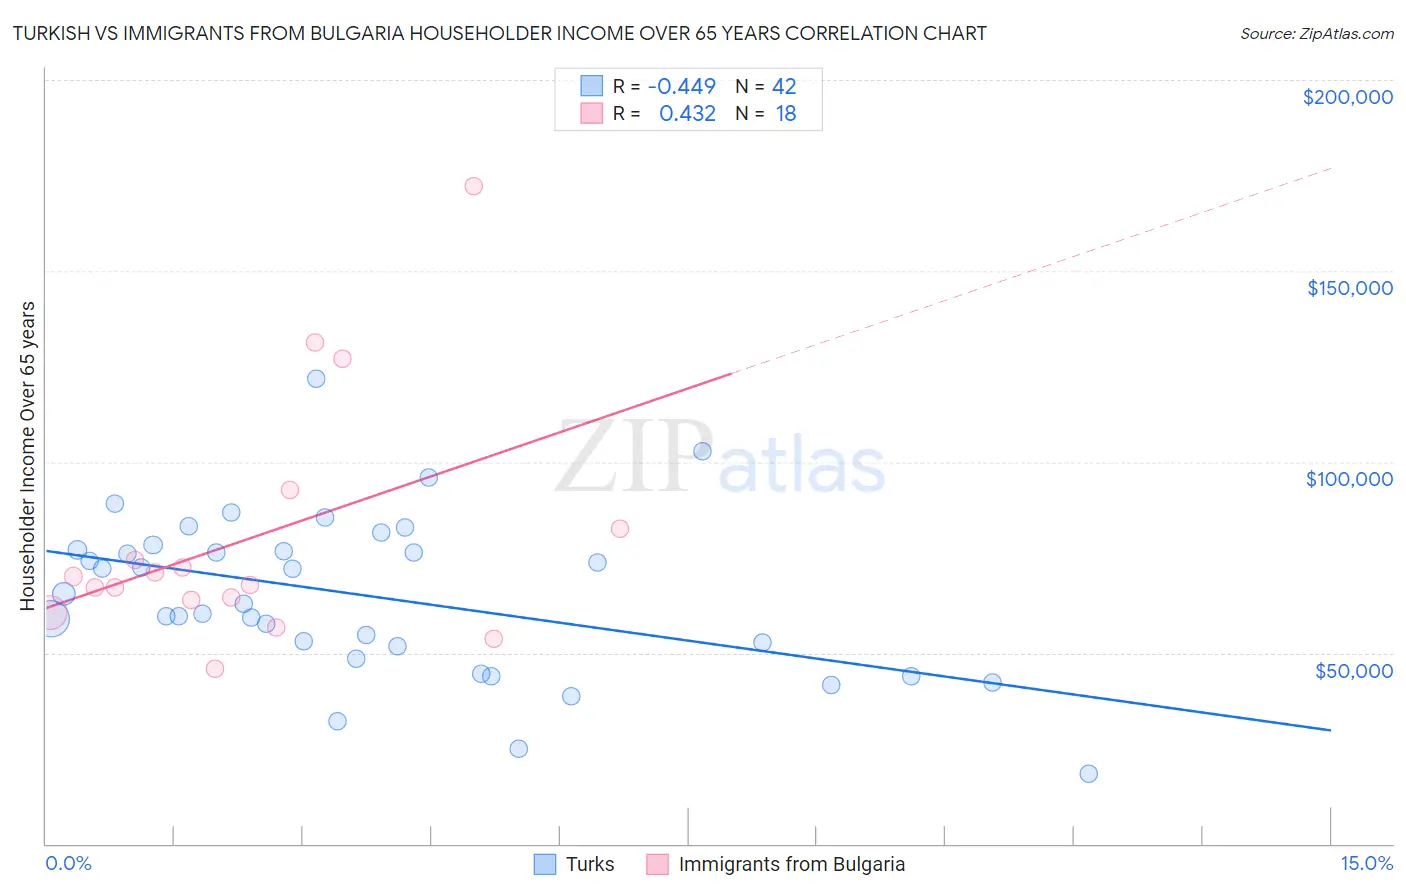 Turkish vs Immigrants from Bulgaria Householder Income Over 65 years